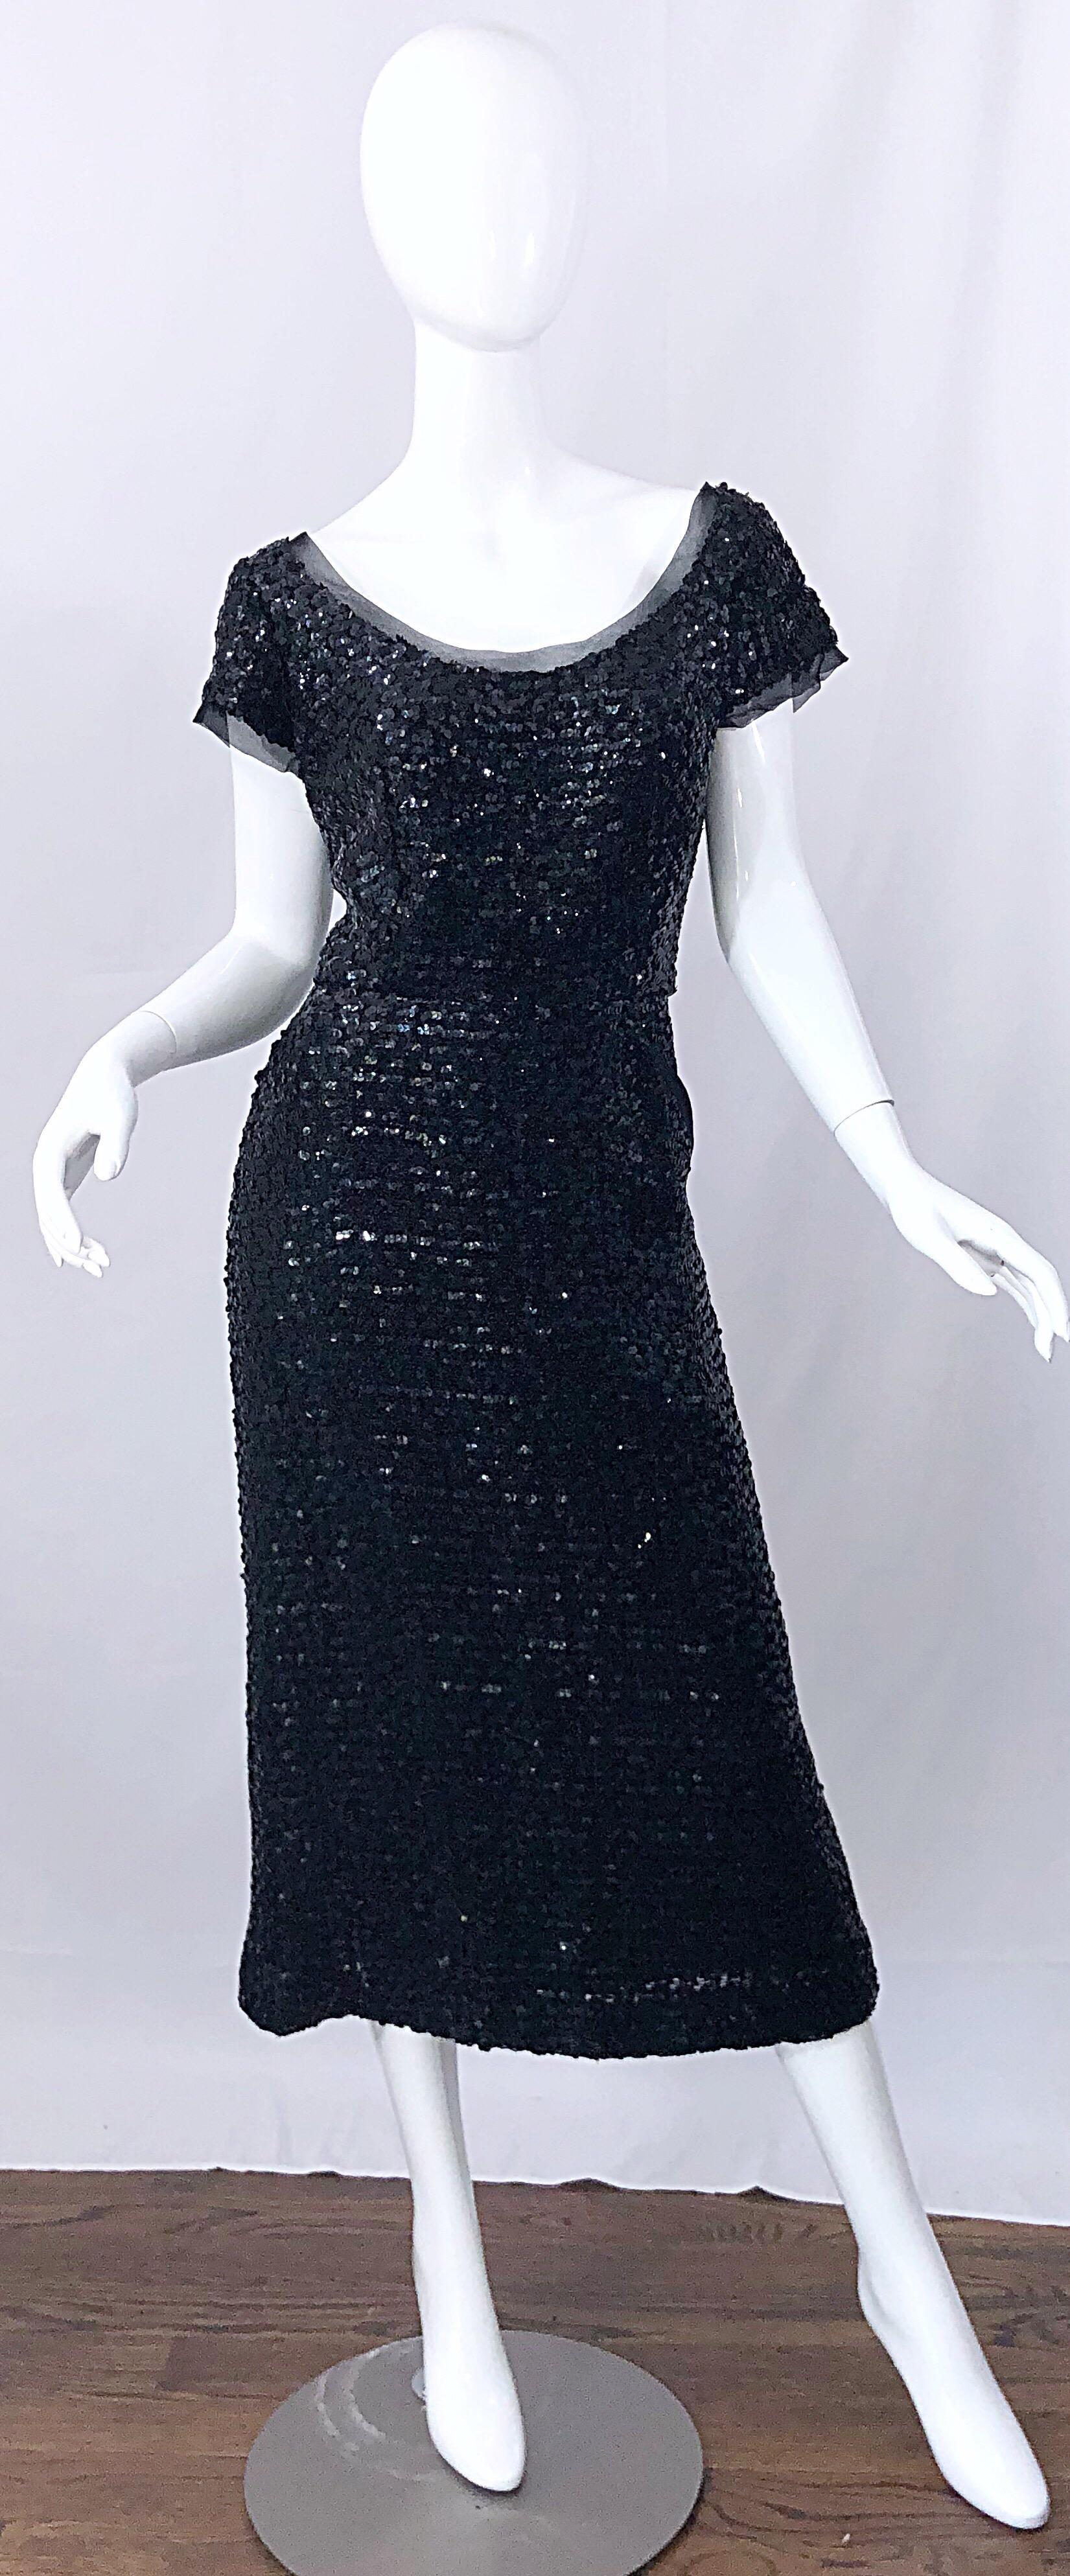 Stunning vintage 50s Bullock's Wilshire demi couture black silk sequined tea length midi dress! Features thousands of hand-sewn black sequins throughout the entire dress. Pocket at the left side of the hip. Black sheer mesh detail around the